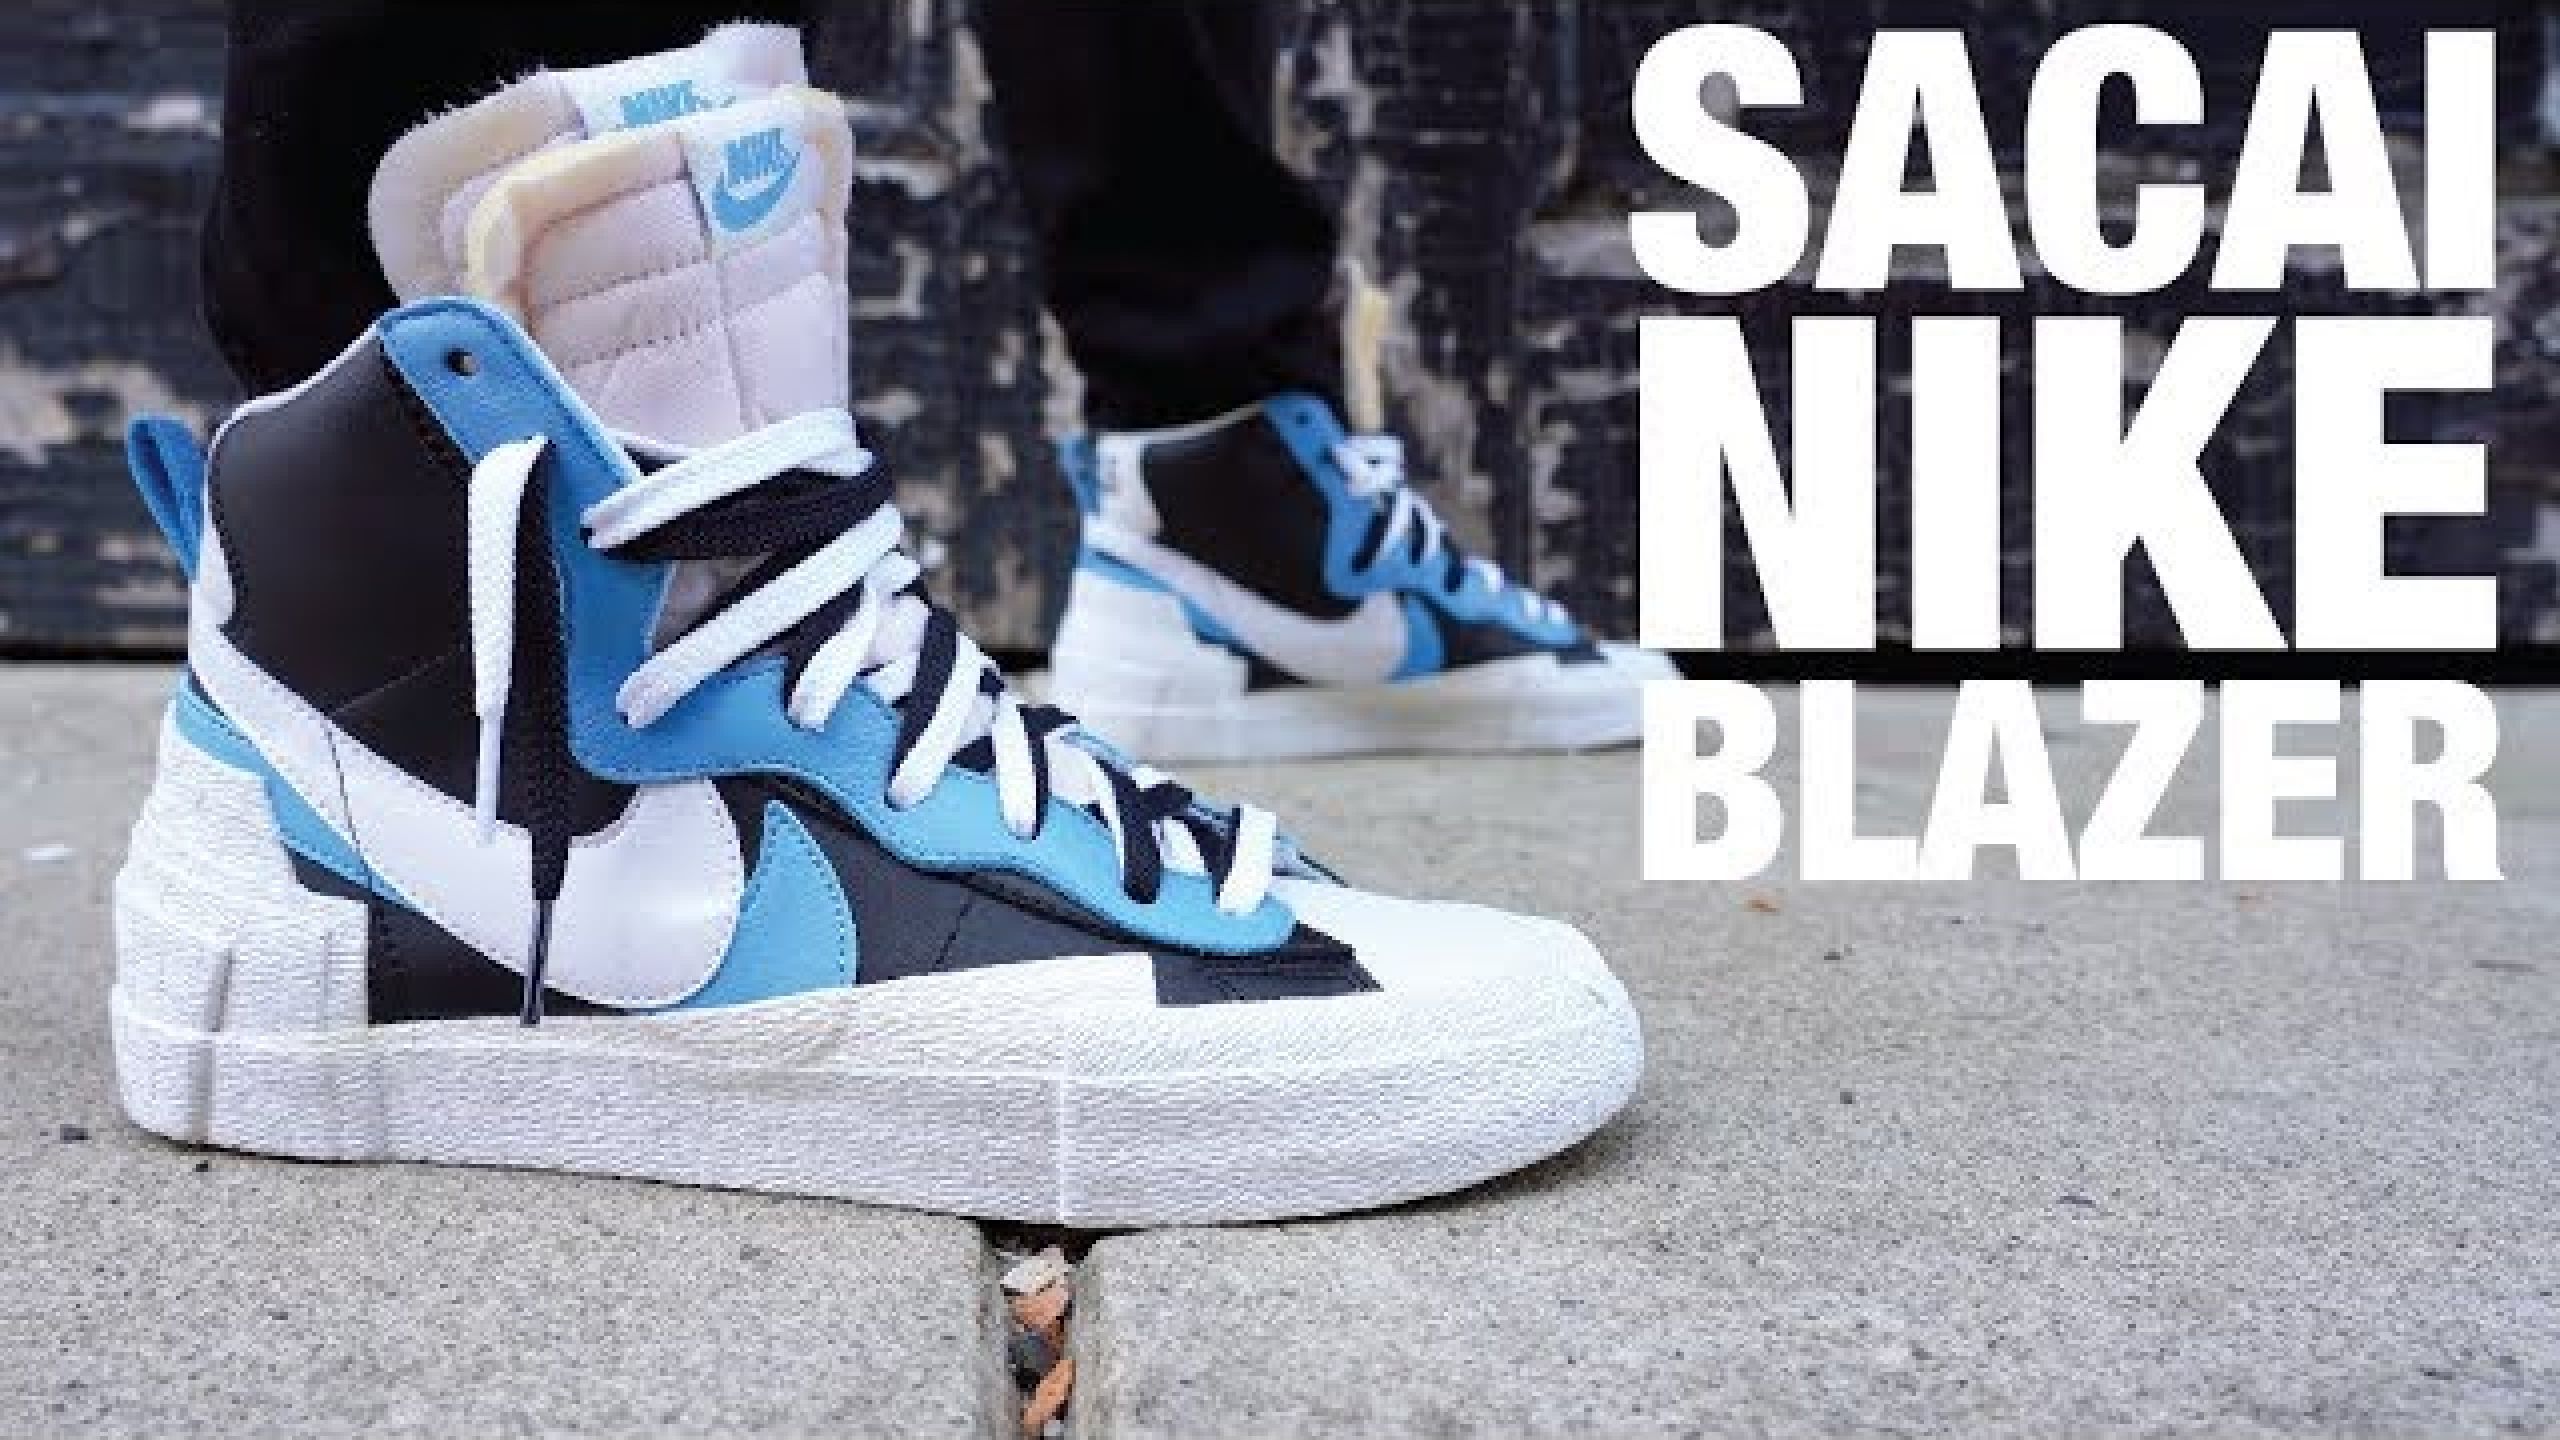 SACAI Nike Blazer Review & On Feet: Clothes, Outfits, Brands, Style and ...